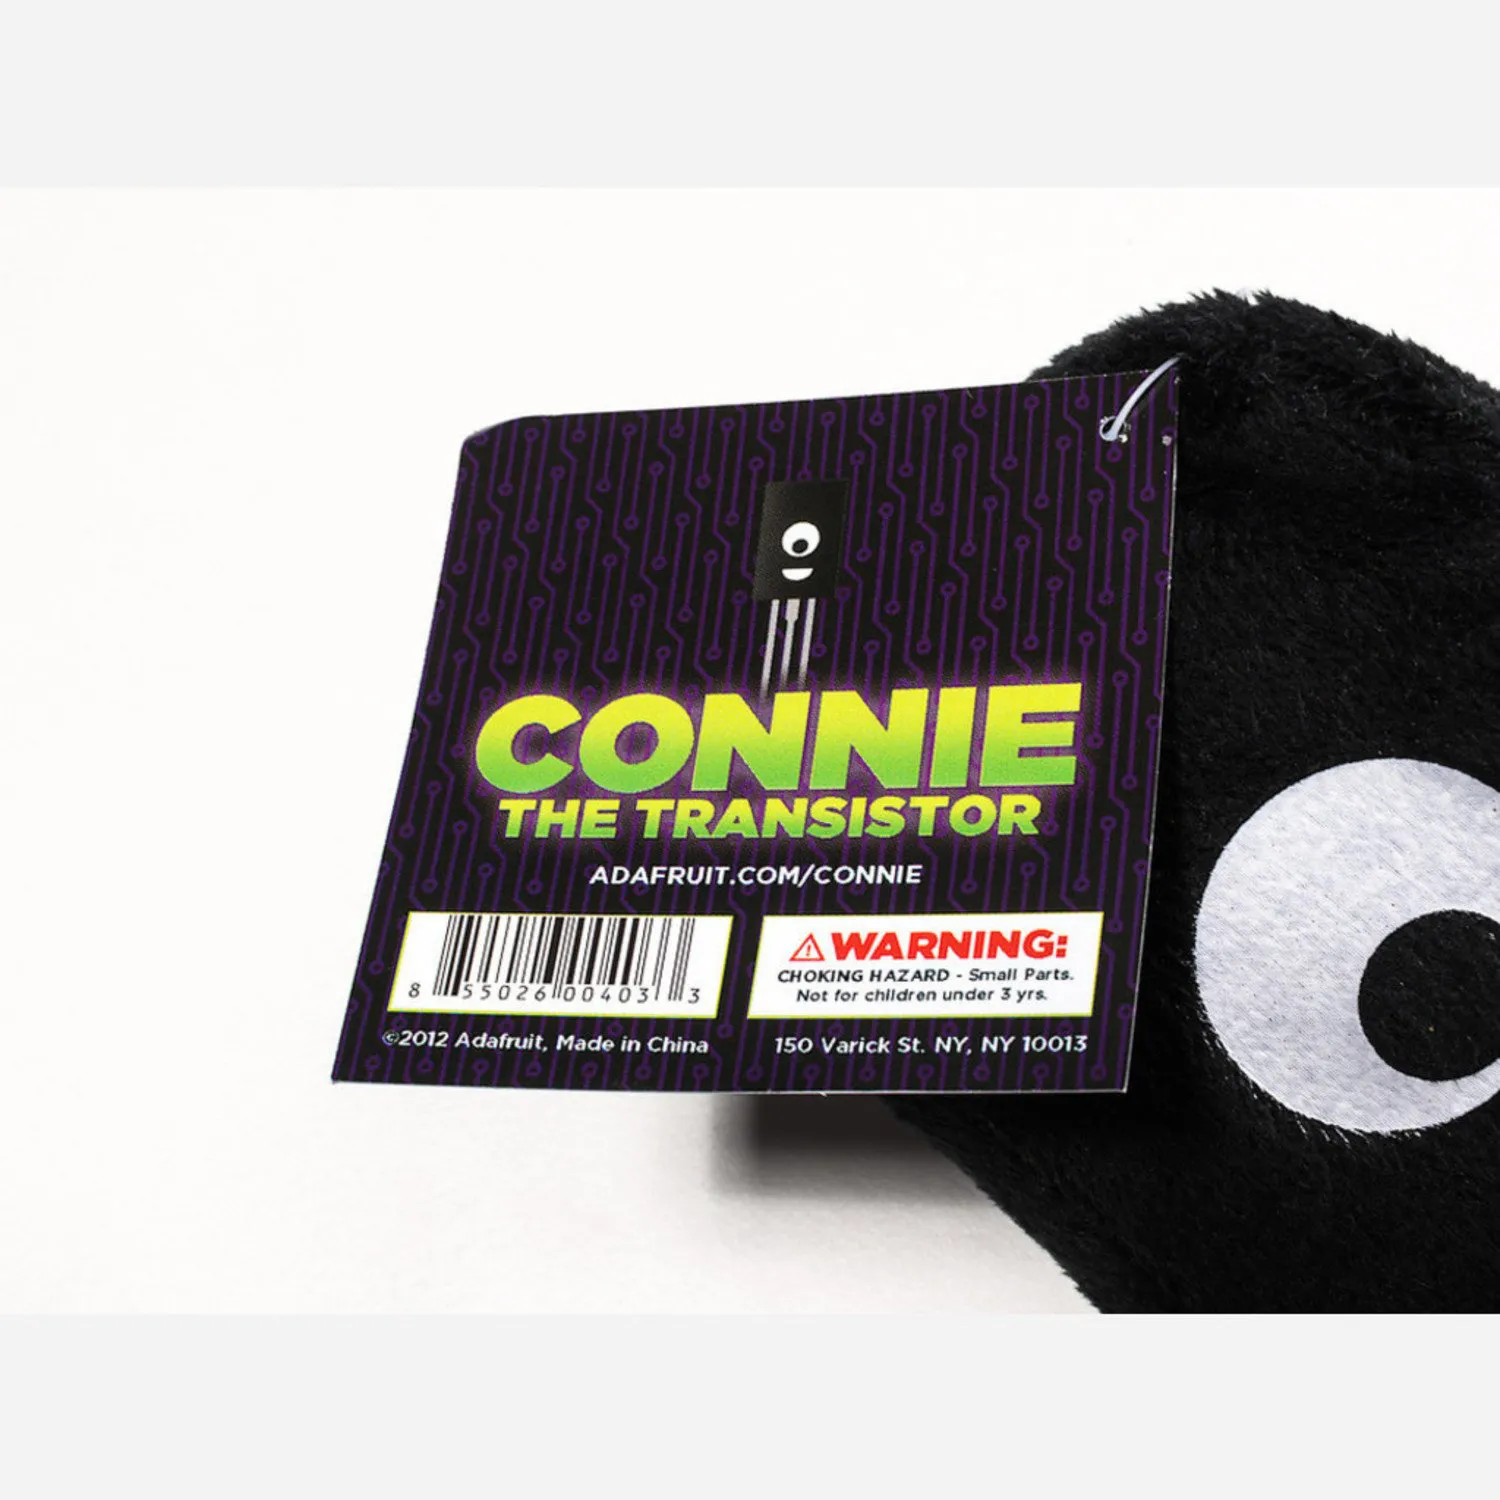 Photo of Connie the Transistor - Circuit Playground Plushie